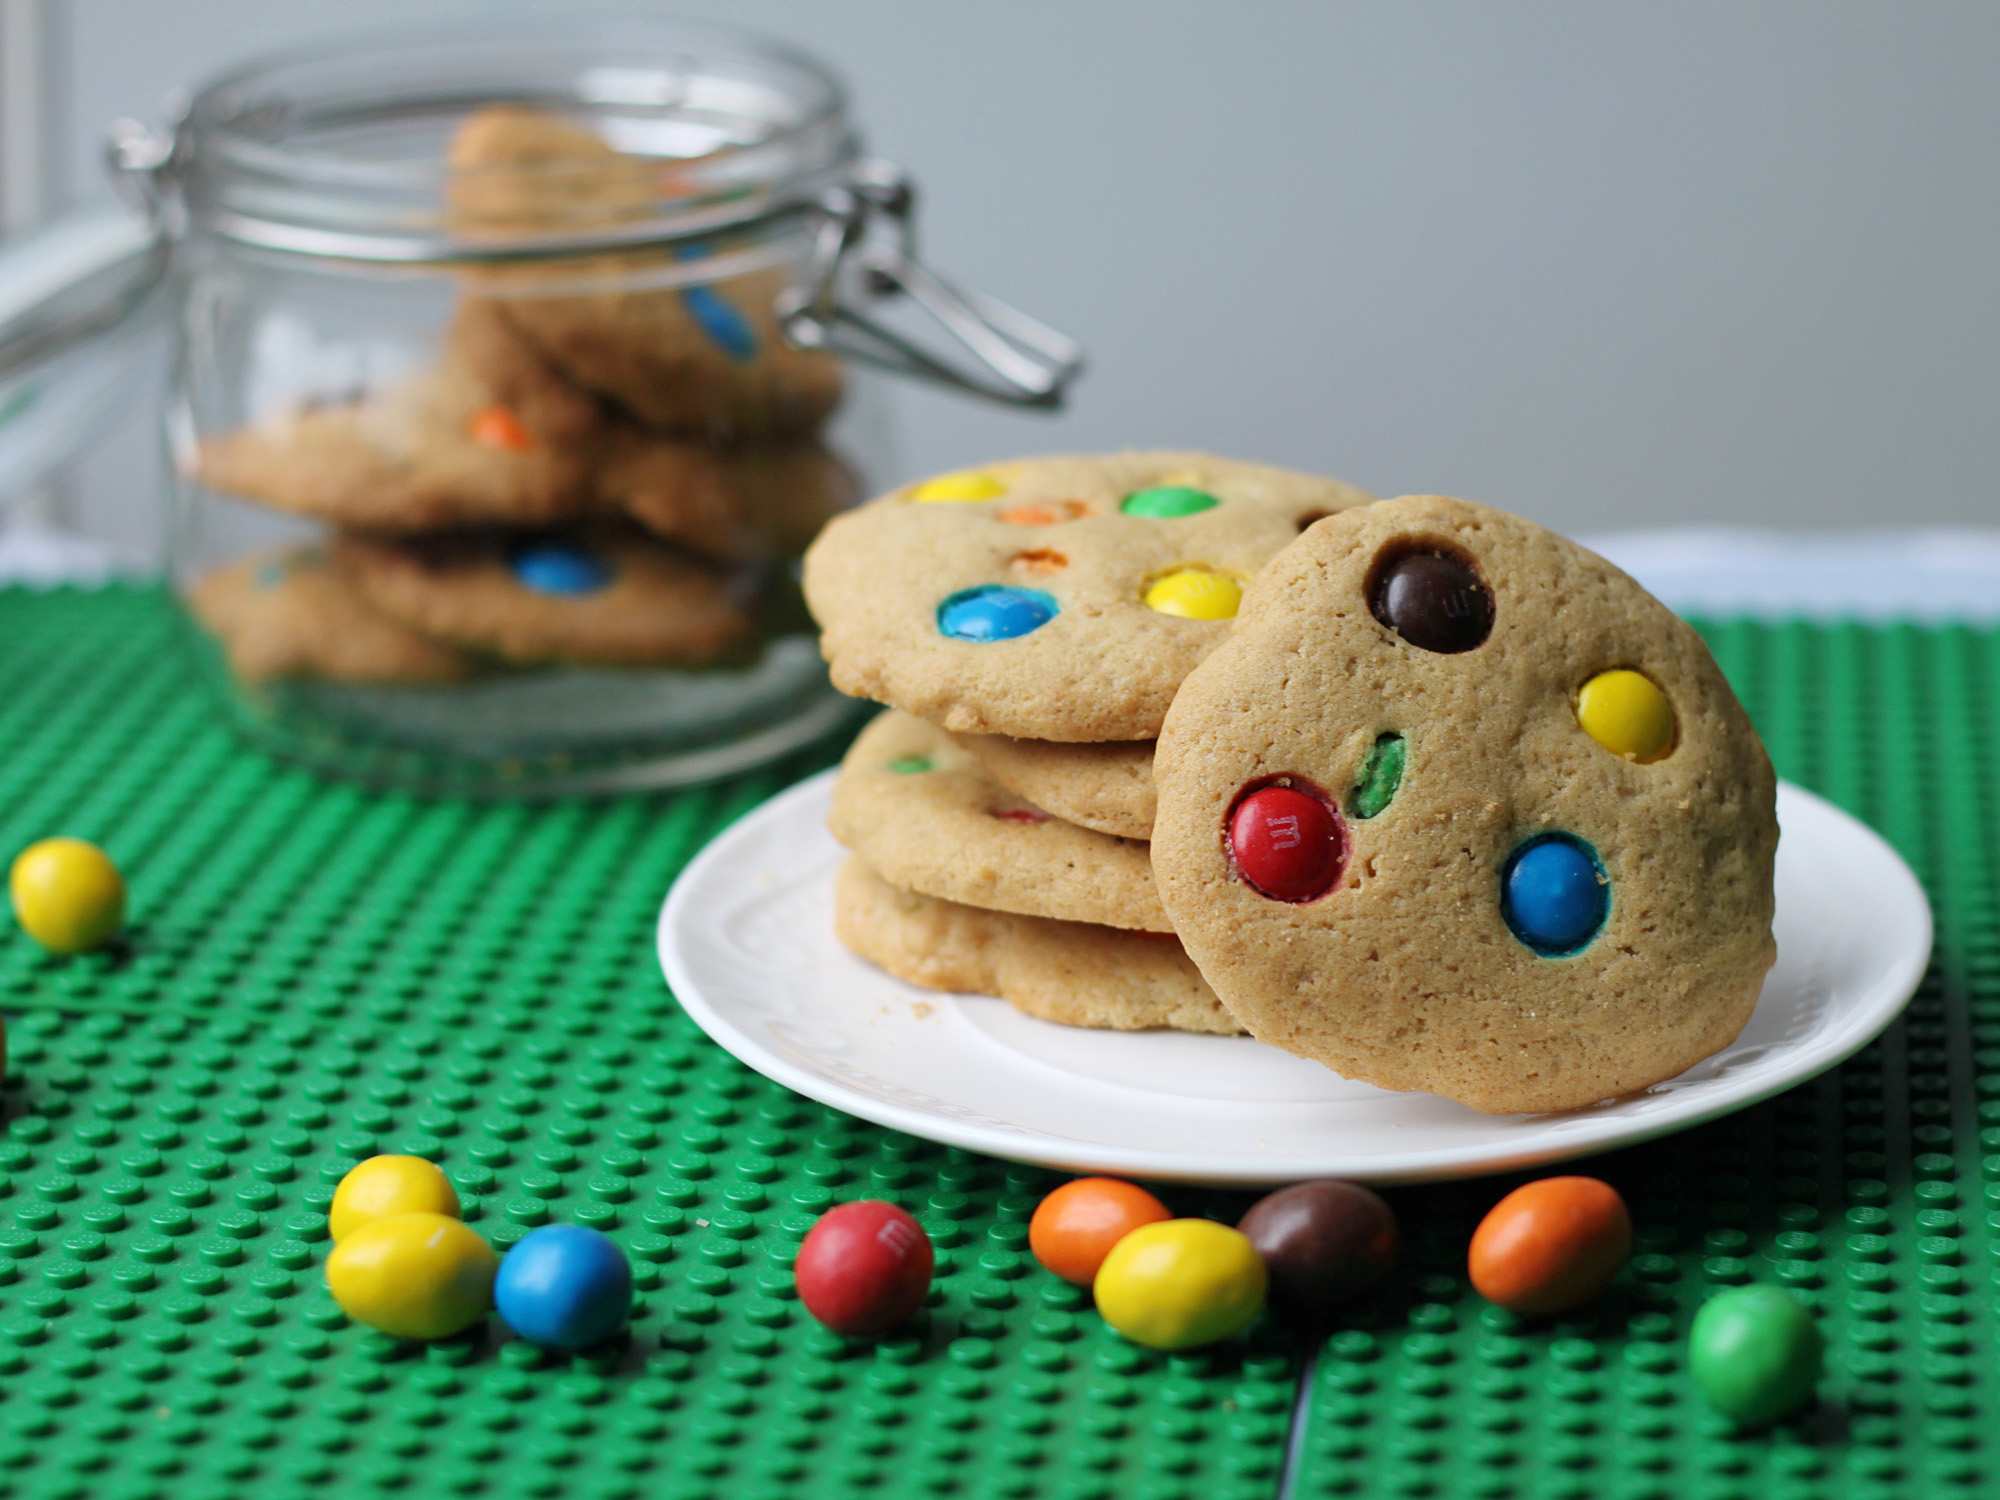 ❄ How To Make M & M COOKIES